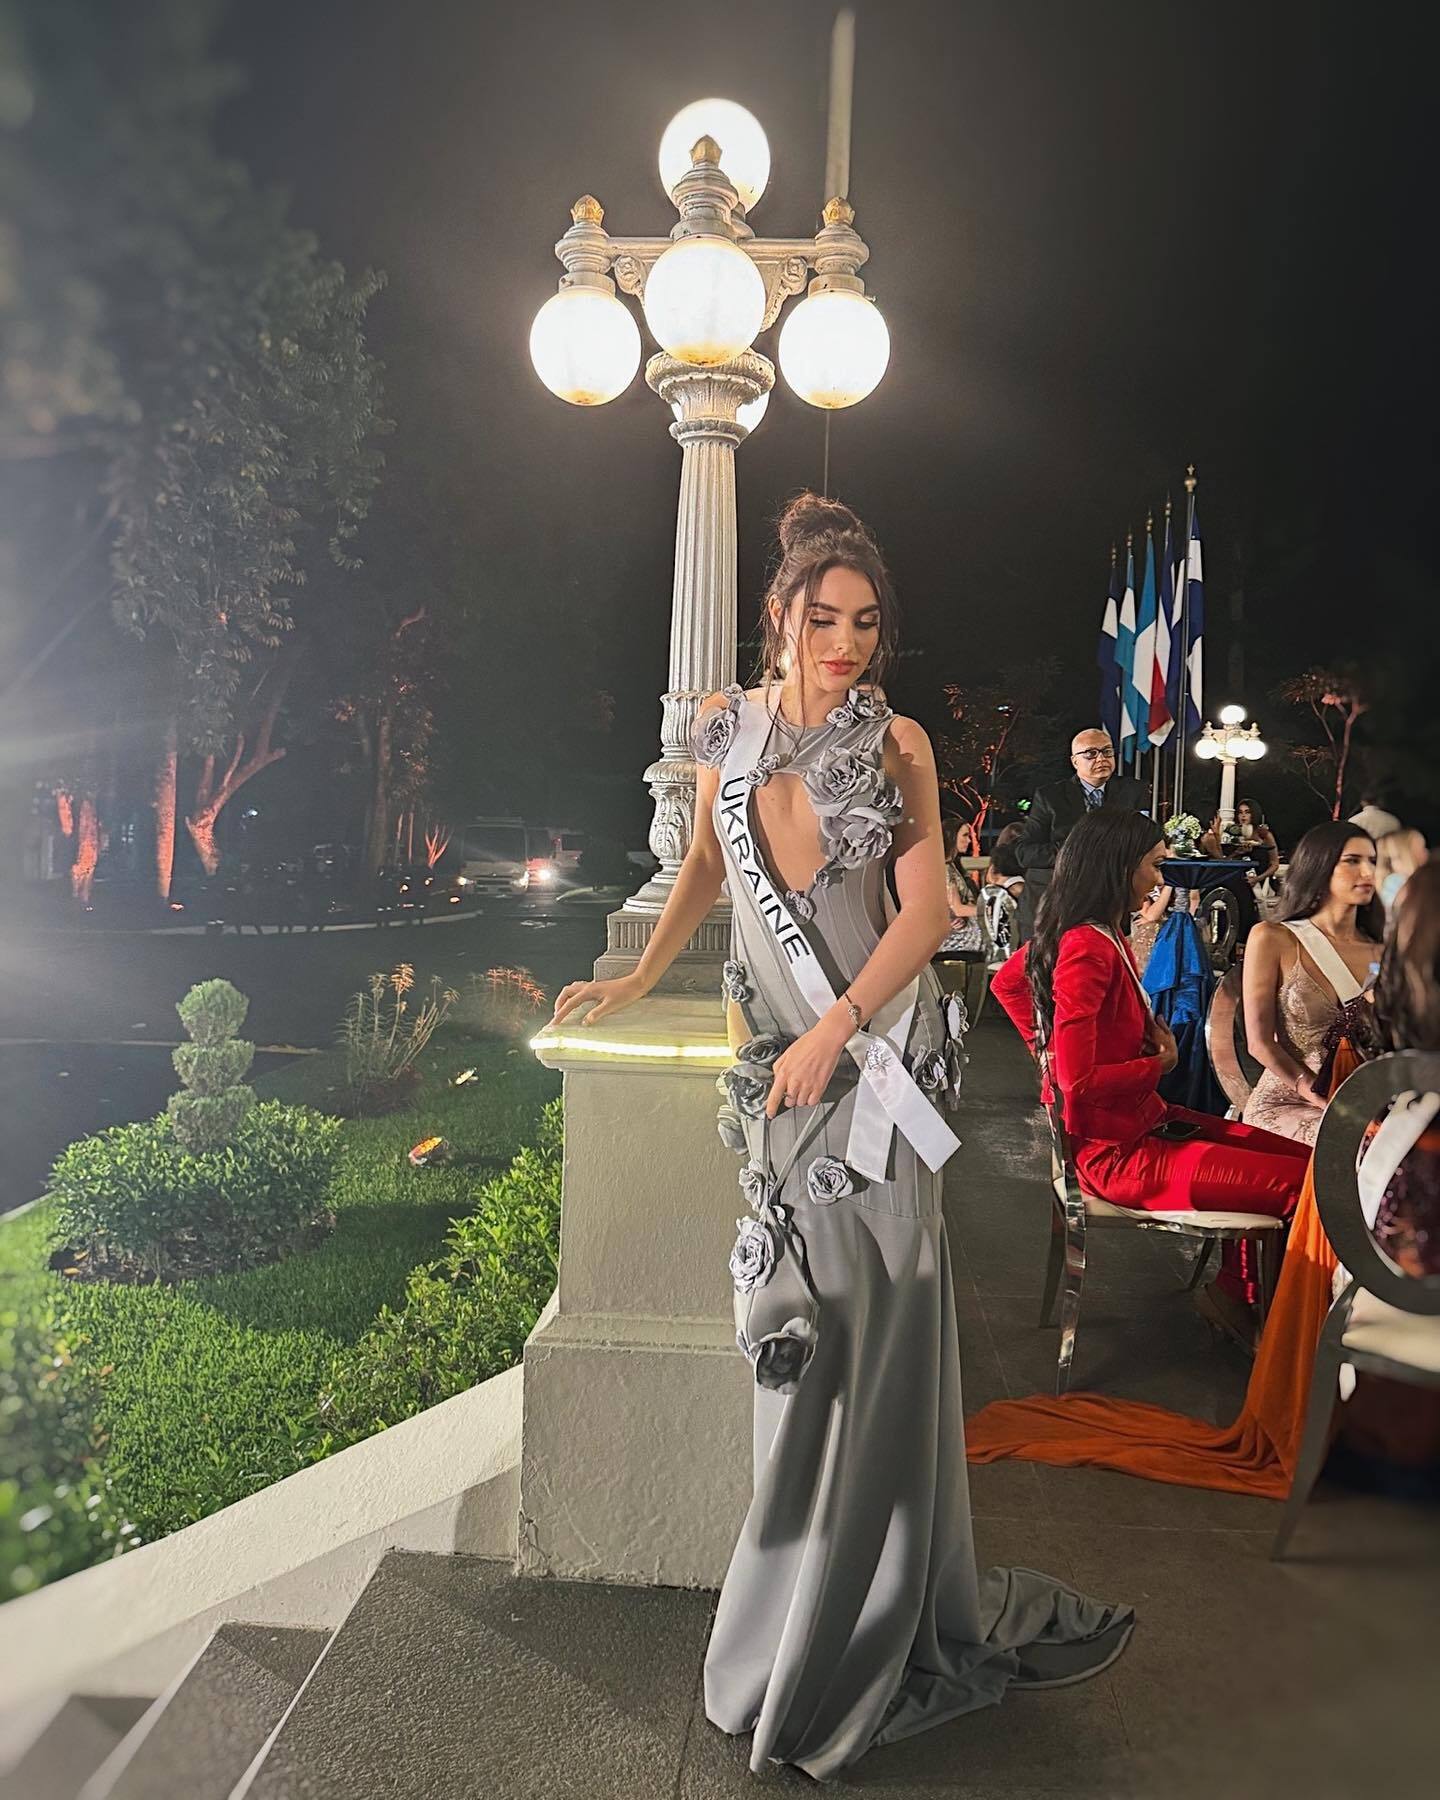 Anhelina Usanova revealed the shocking truth about ''Miss Universe 2023'': Ukraine is not interesting to anyone, there was ignorance. This contest is about money